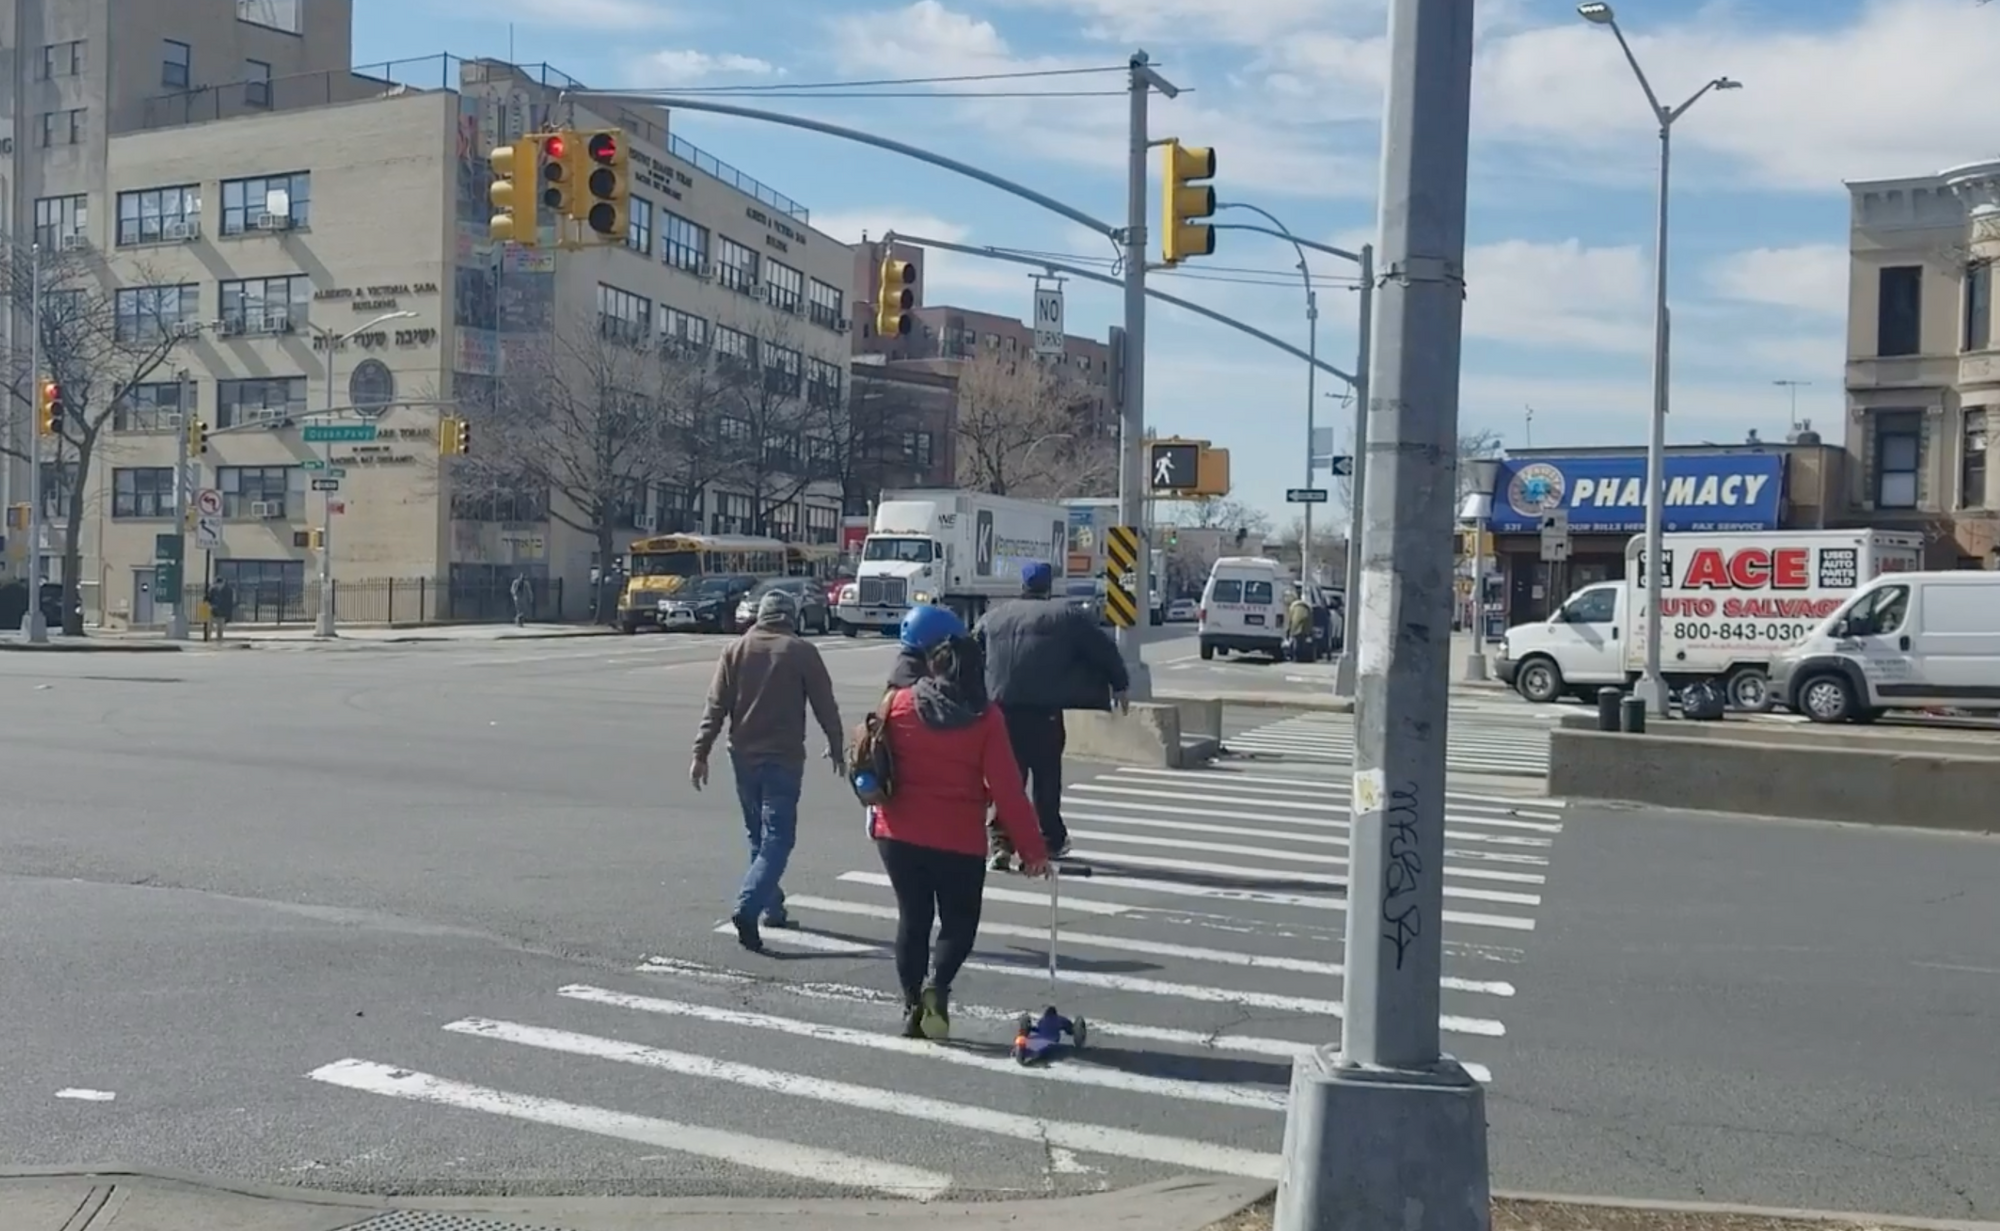 Another Pedestrian Hit At Ocean Parkway And Church Avenue, CB12 Oppose Proposed Traffic Improvements